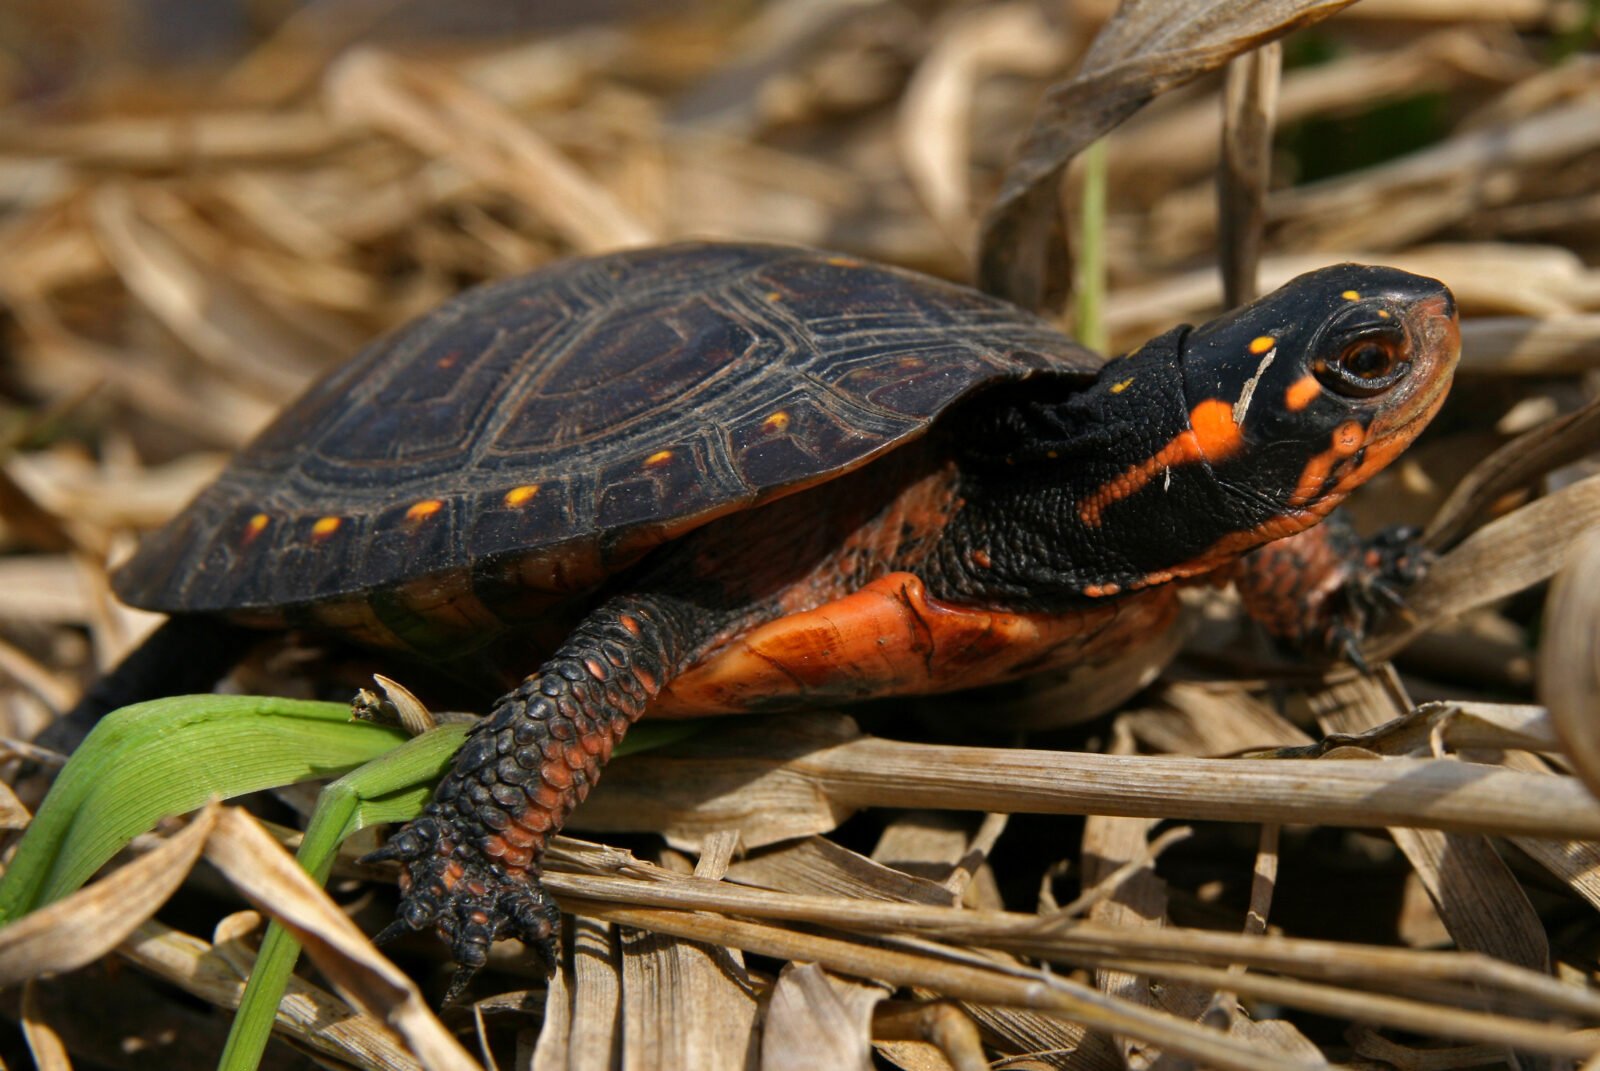 An image of a spotted turtle